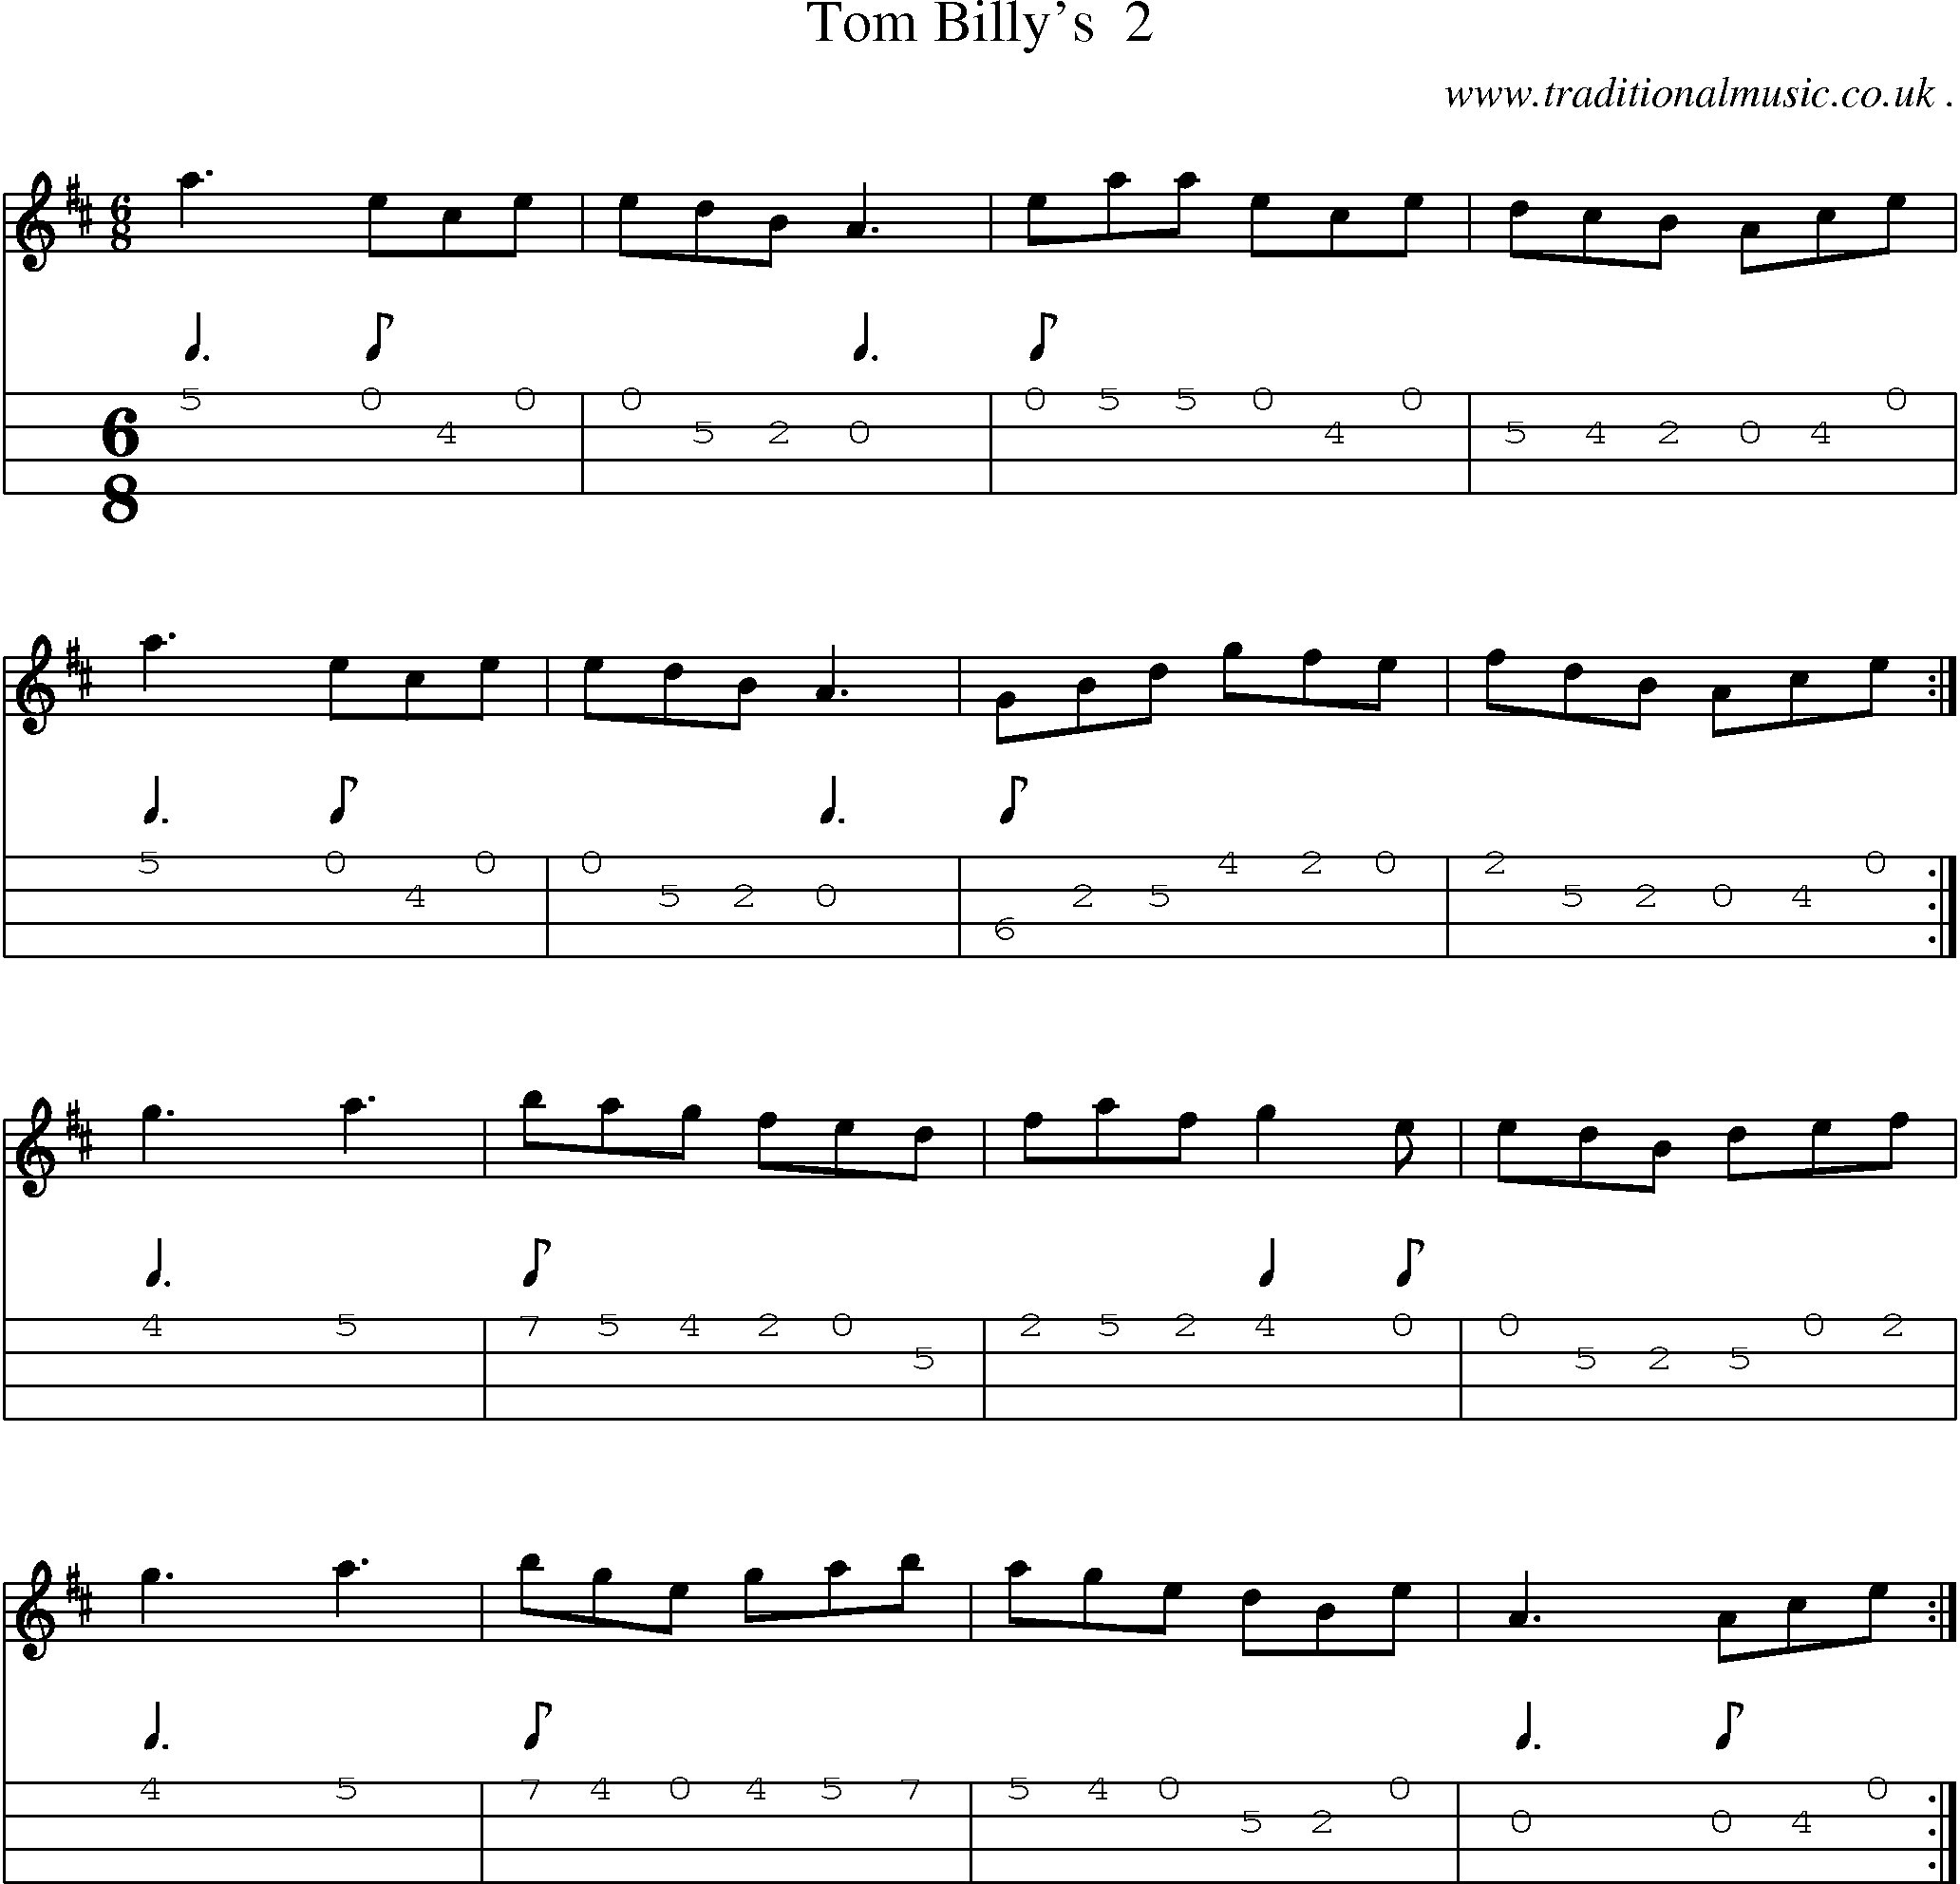 Sheet-Music and Mandolin Tabs for Tom Billys 2